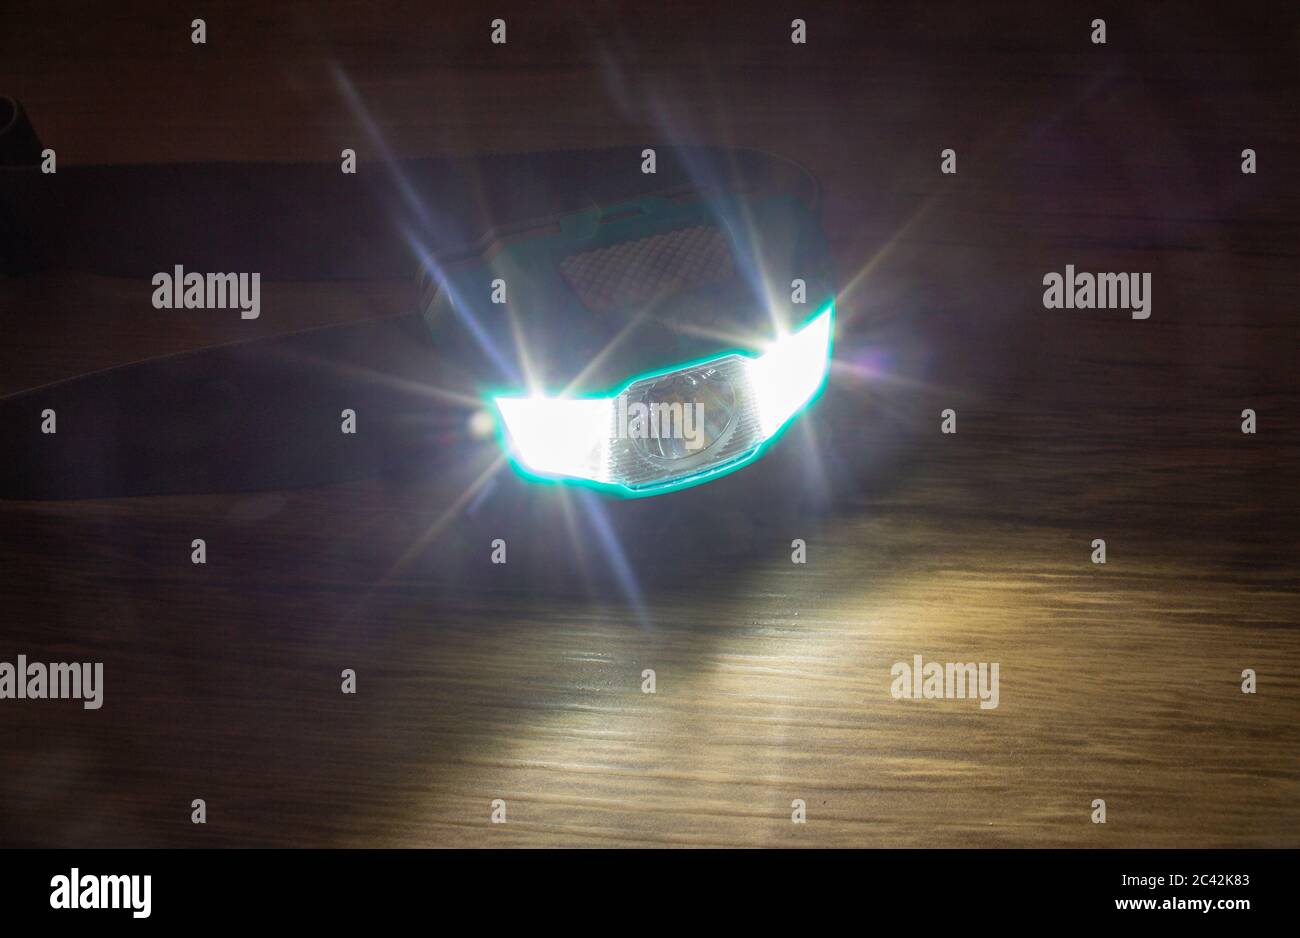 Teal headlamp turned on show the light bean on a wooden surface Stock Photo